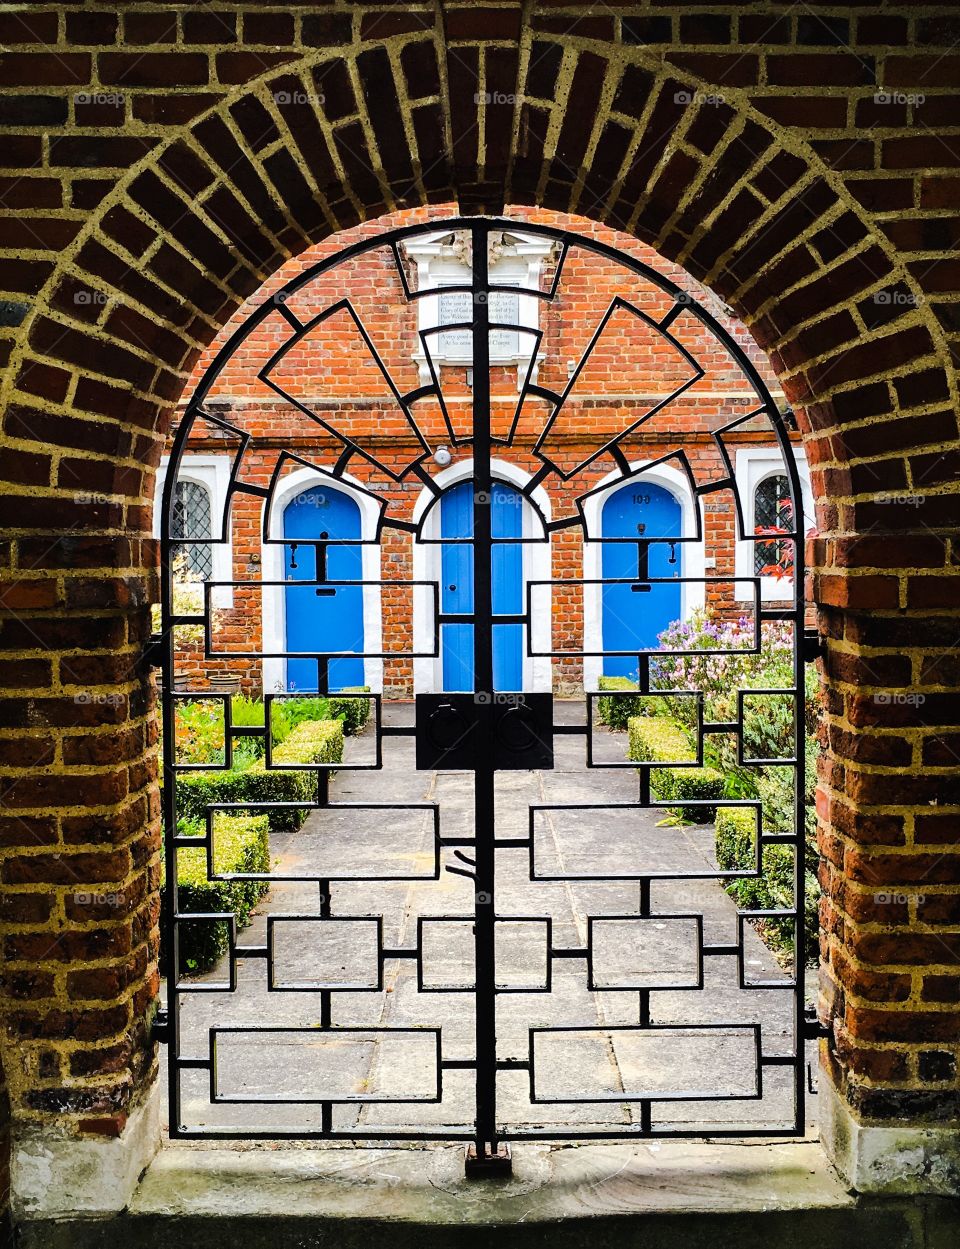 Locked gates of Convent in Old Amersham, England.